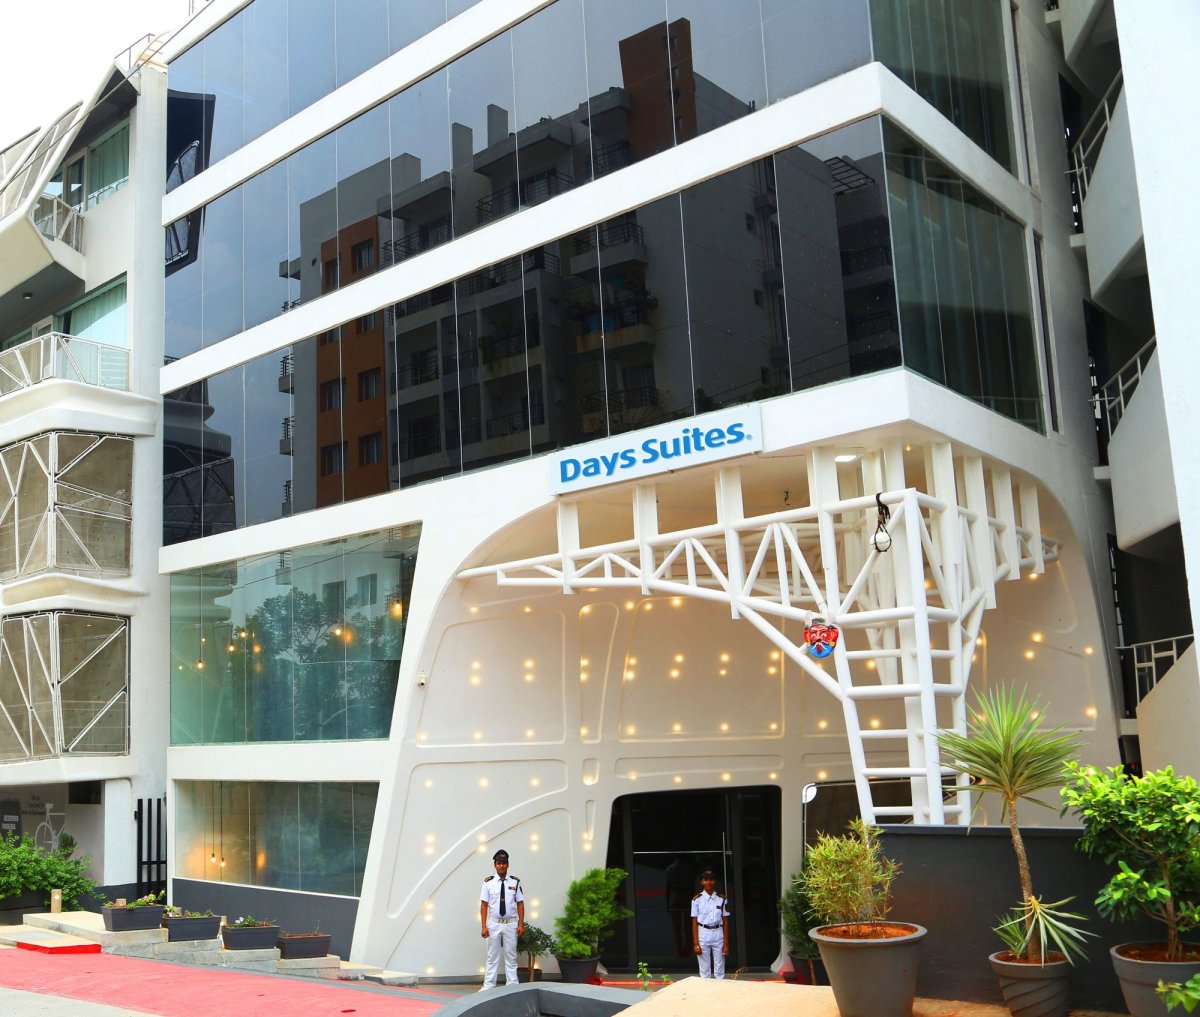 Best Price on Confido inn and suites in Bangalore + Reviews!